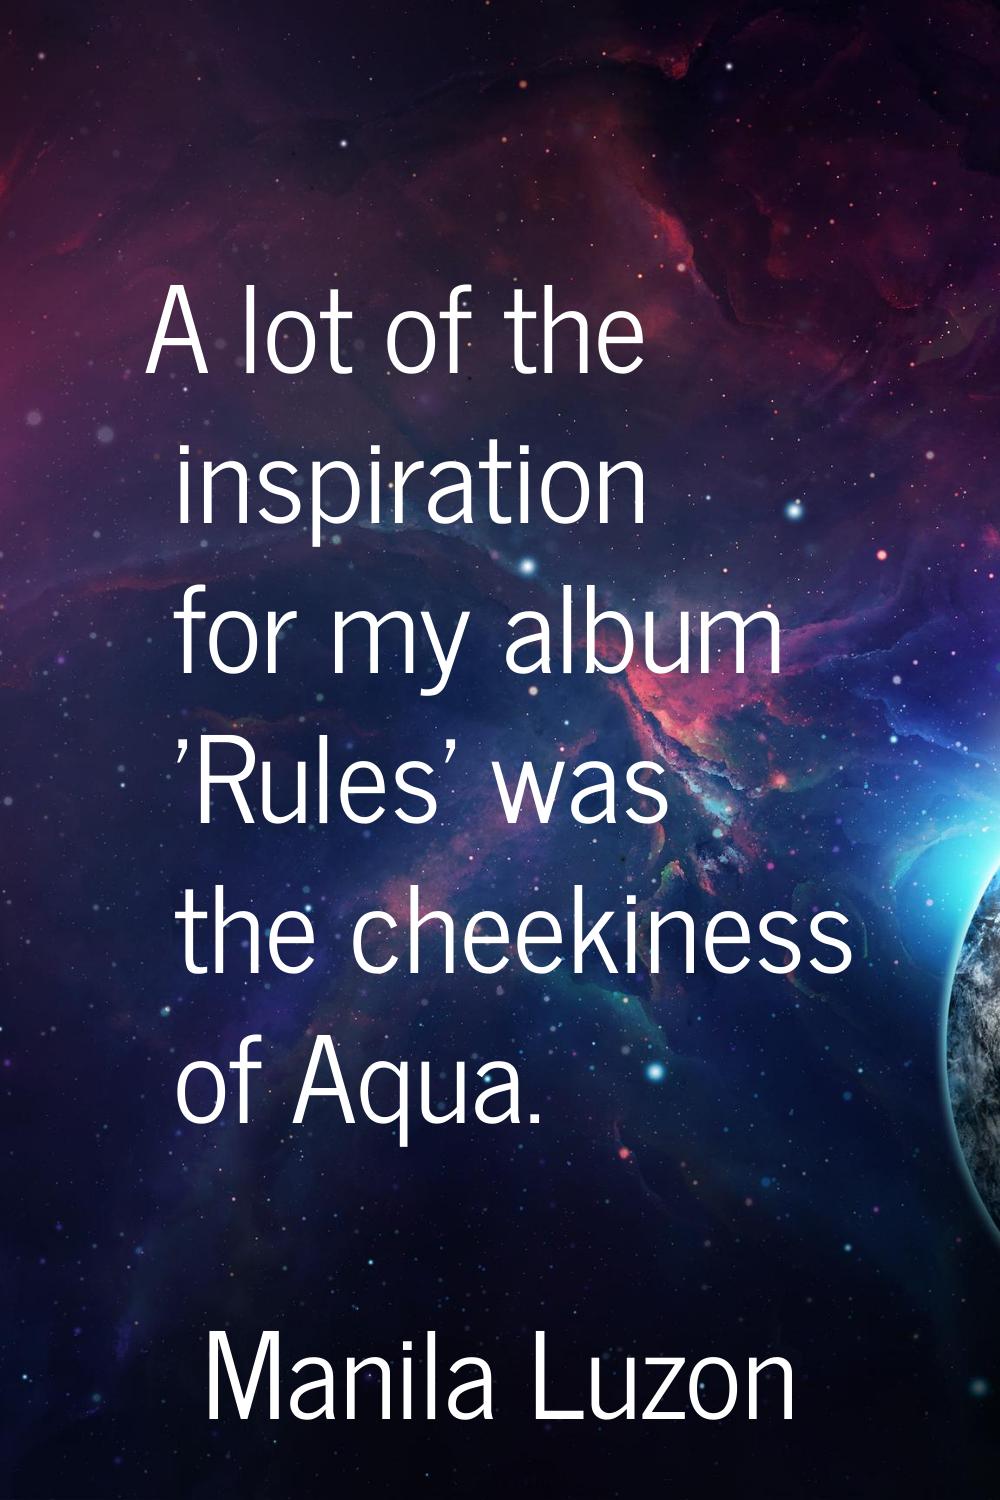 A lot of the inspiration for my album 'Rules' was the cheekiness of Aqua.